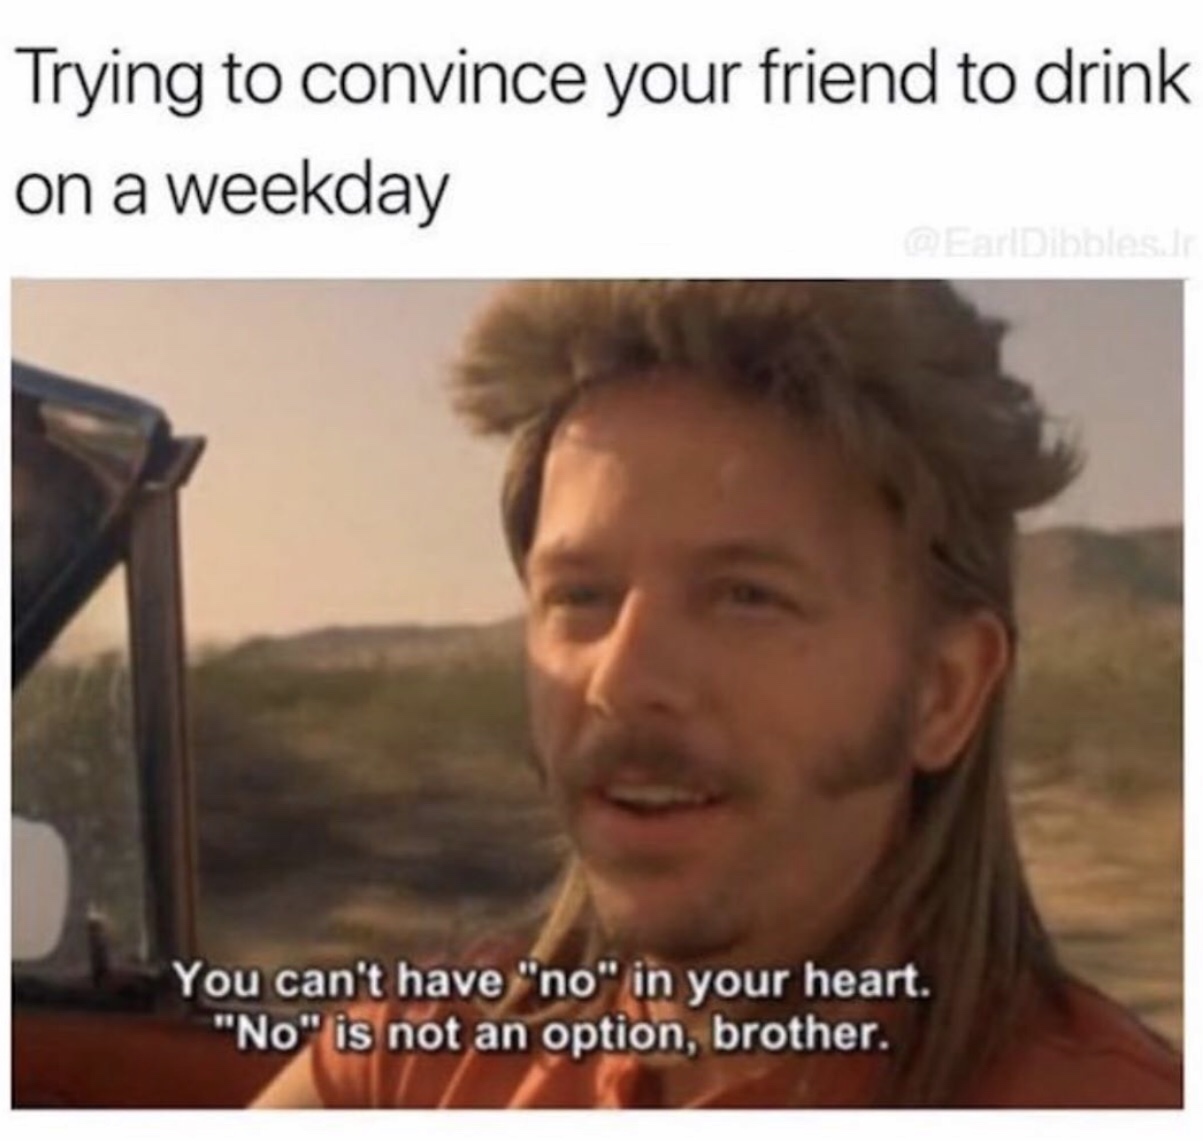 drinking memes - Trying to convince your friend to drink on a weekday You can't have "no" in your heart. "No" is not an option, brother.